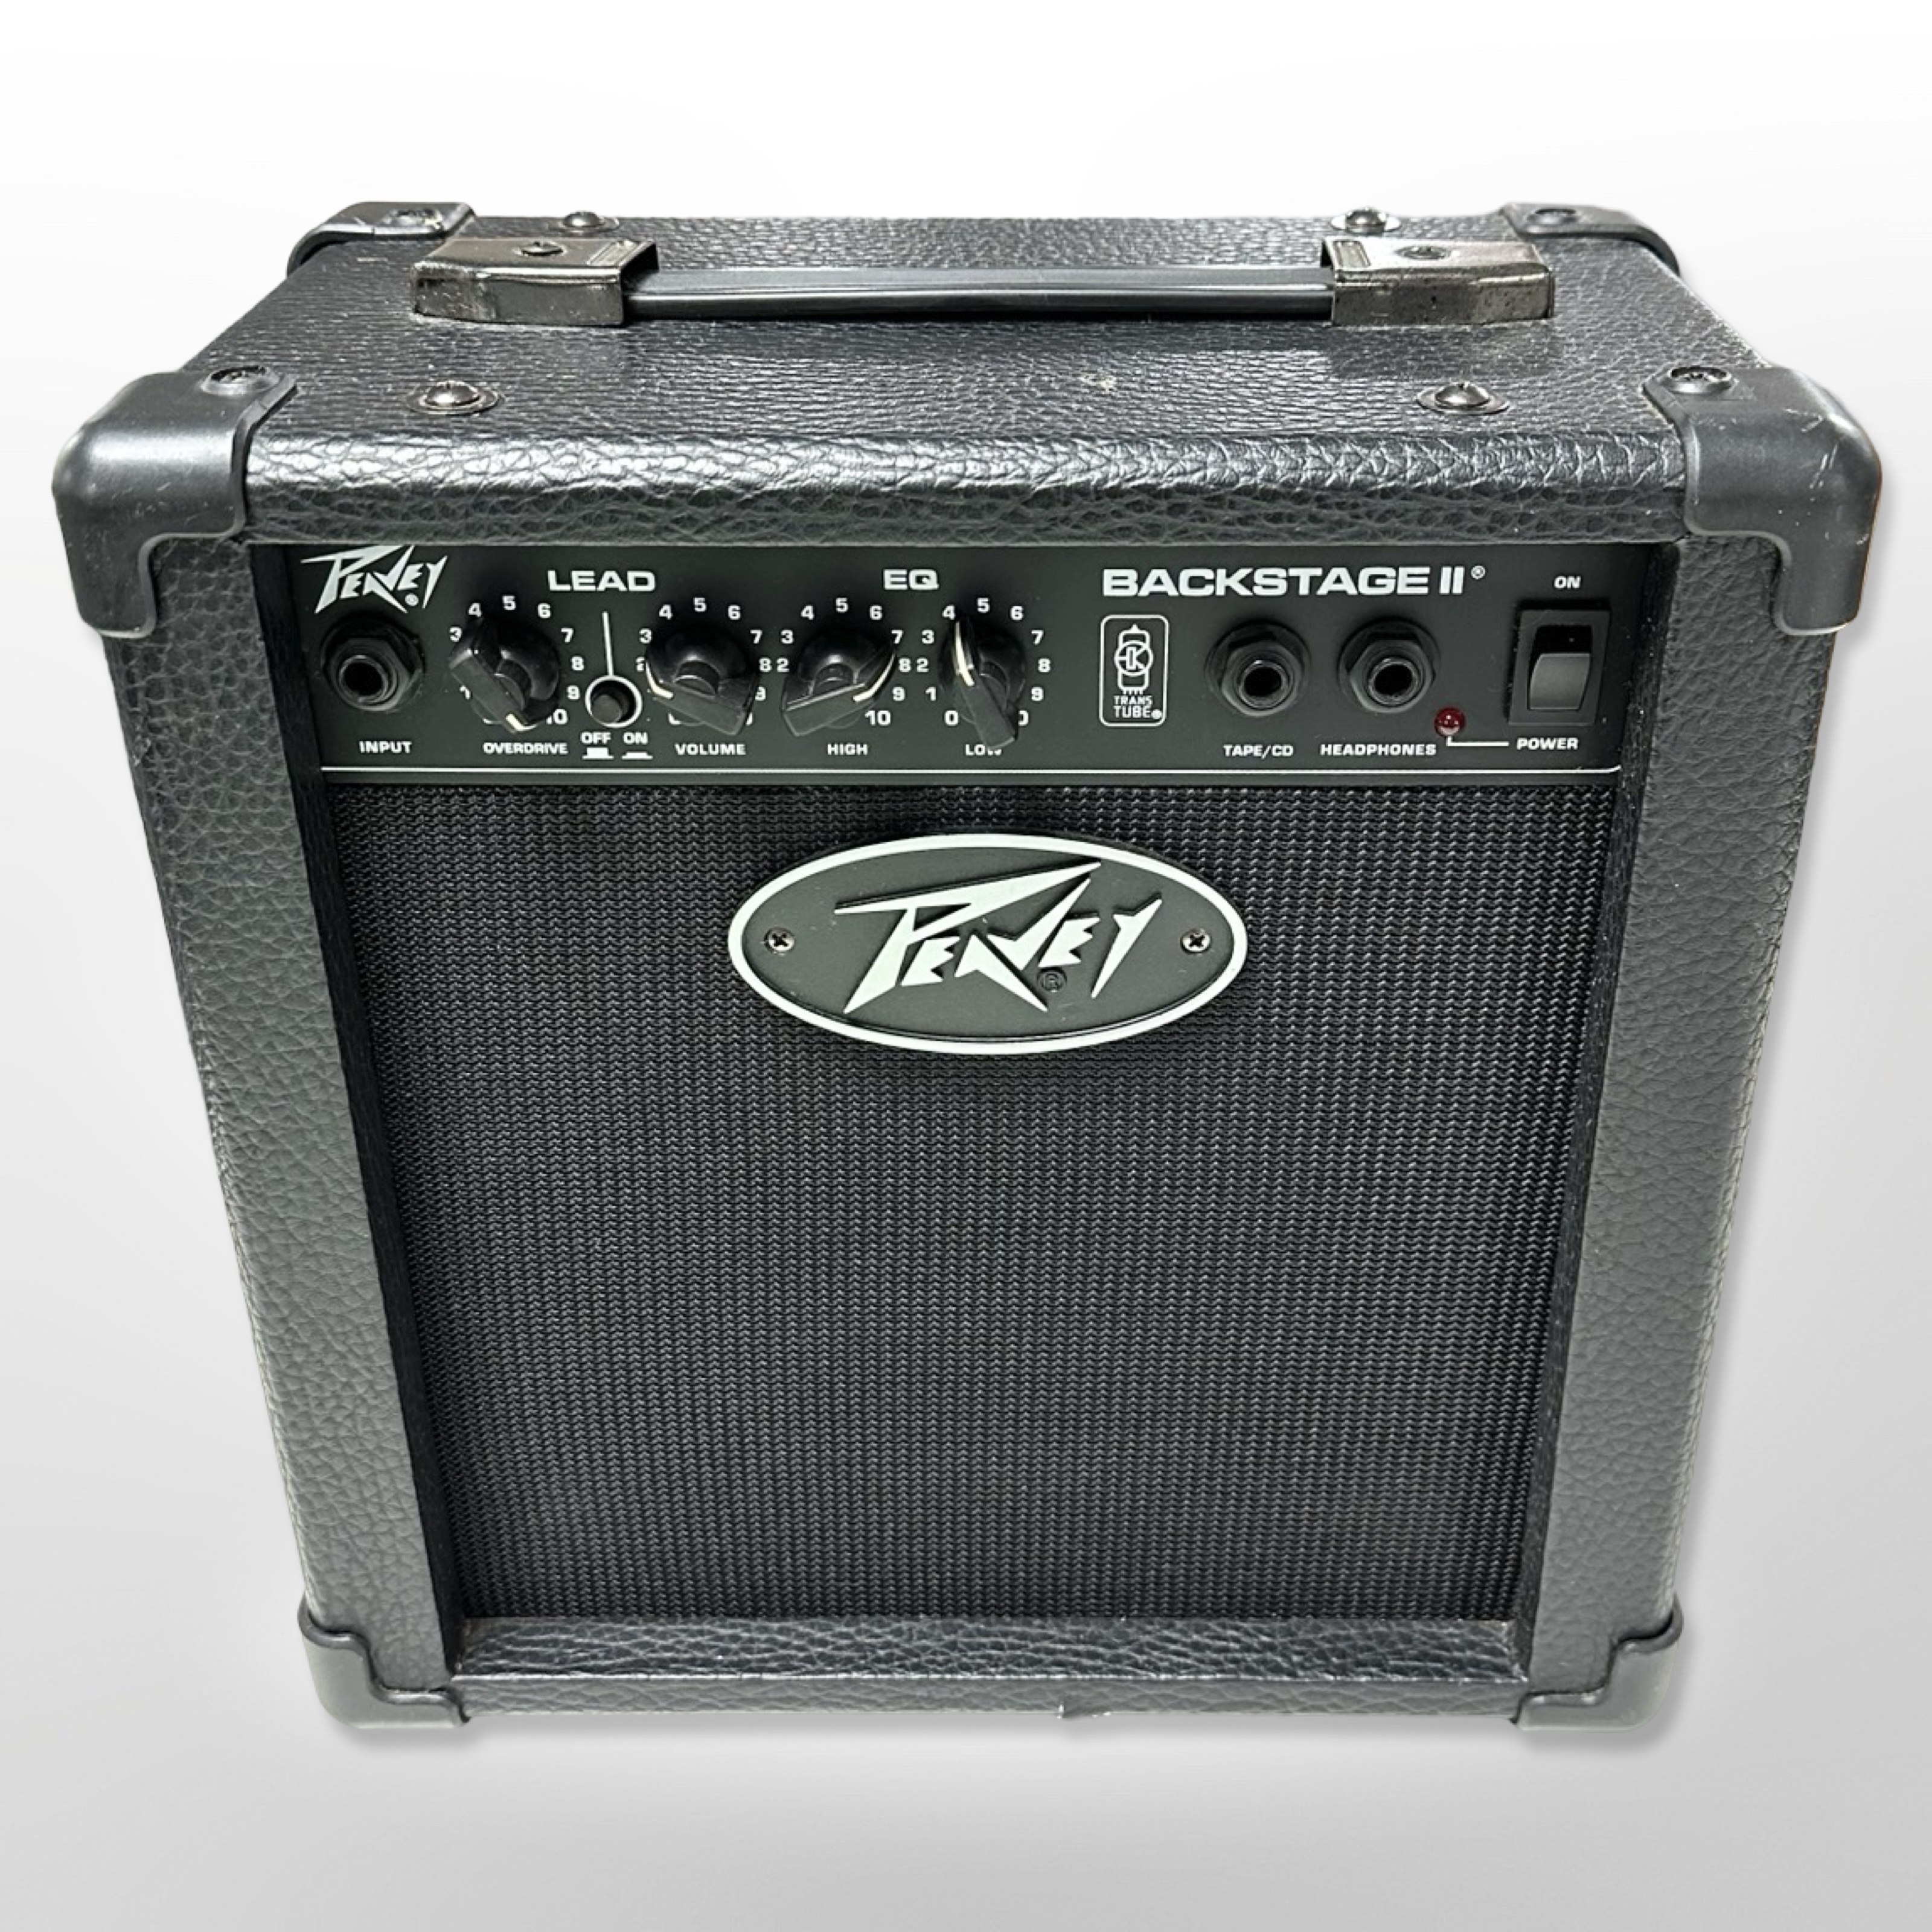 A Peavey Backstage II practice amplifier, with lead.